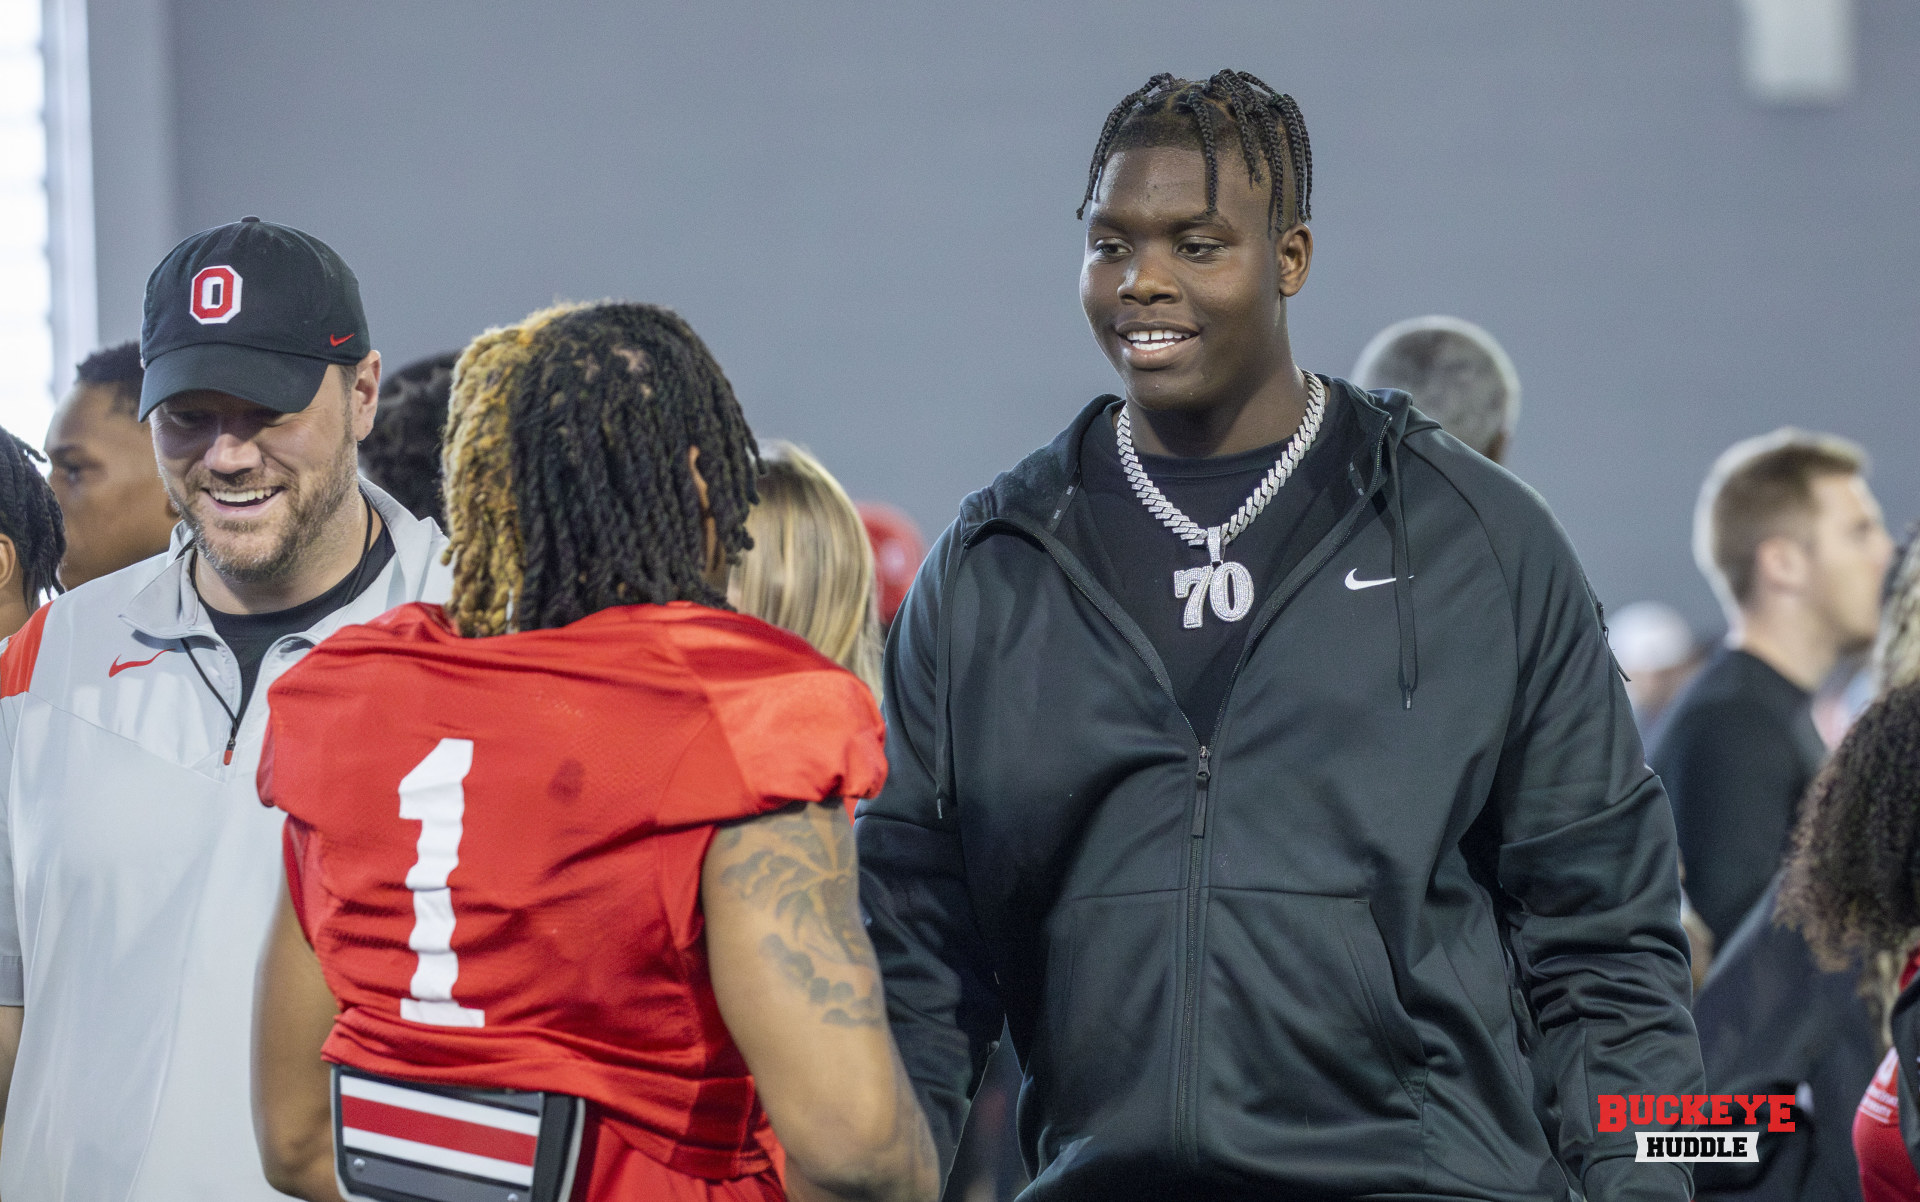 Are the Buckeyes Making Moves with Five-Star Targets?